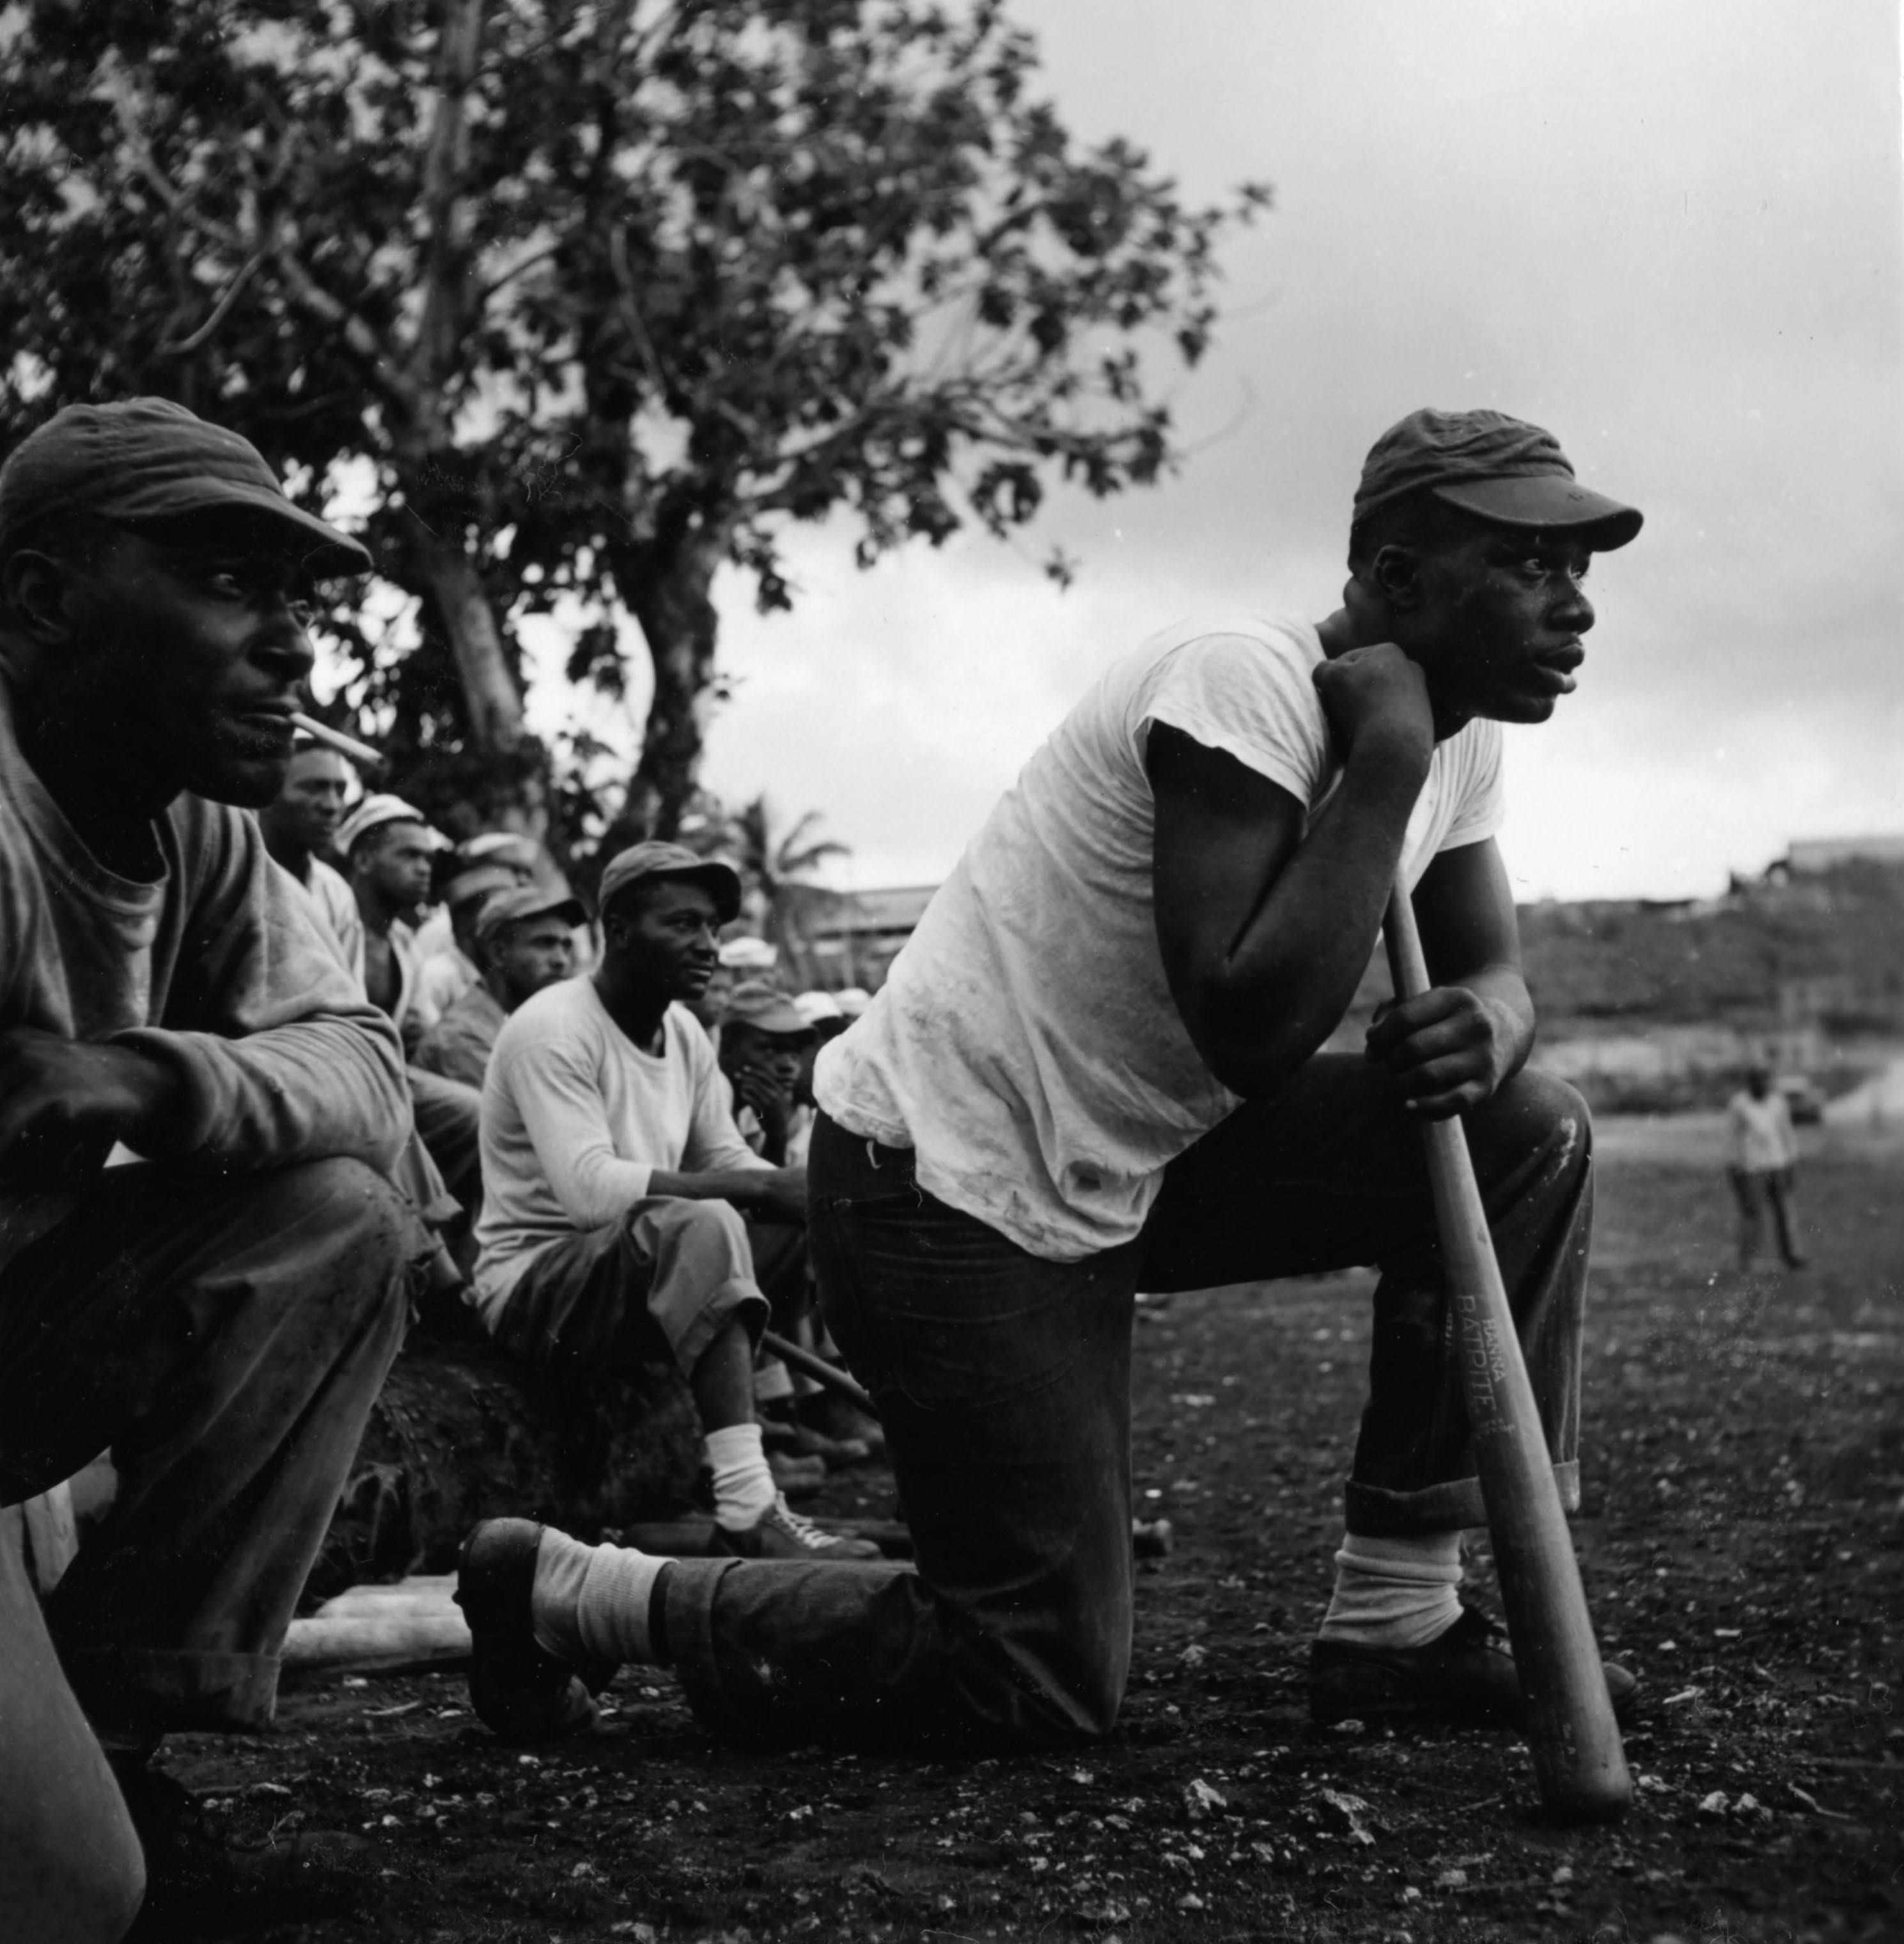 Sailors assigned to work as laborers at the U.S. Naval Supply Depot on Guam playing baseball. (Wayne Miller—Magnum Photos)